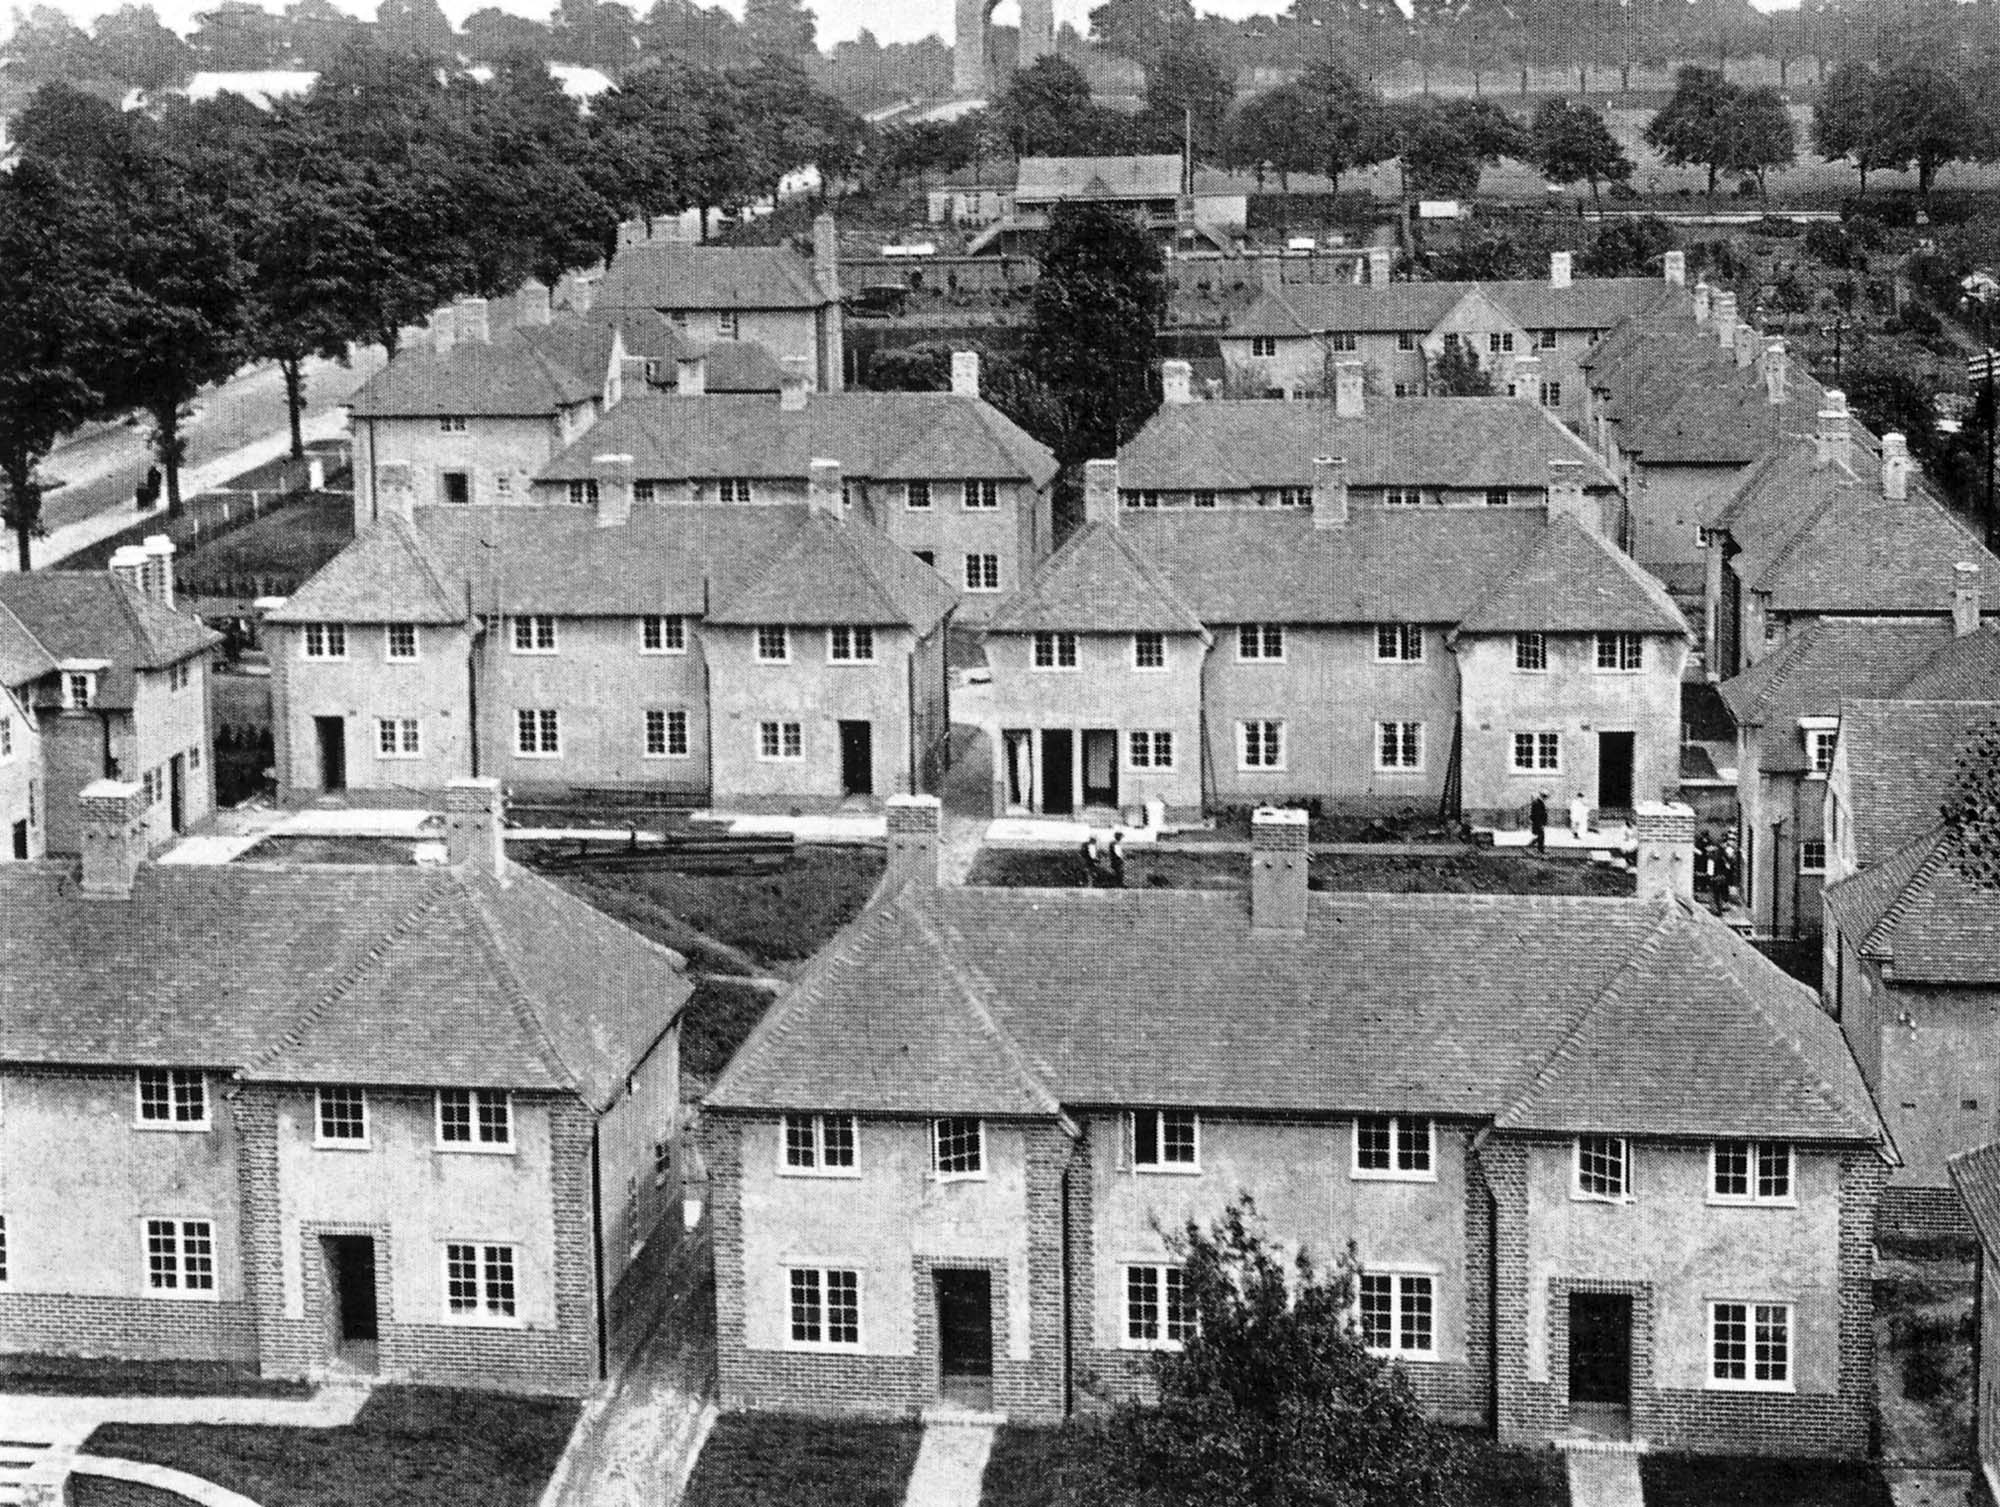 The ‘firemen’s houses’ that surrounded Central Station, the Victoria Park War Memorial is in the far distance. Many of the houses still remain - Malc Tovey